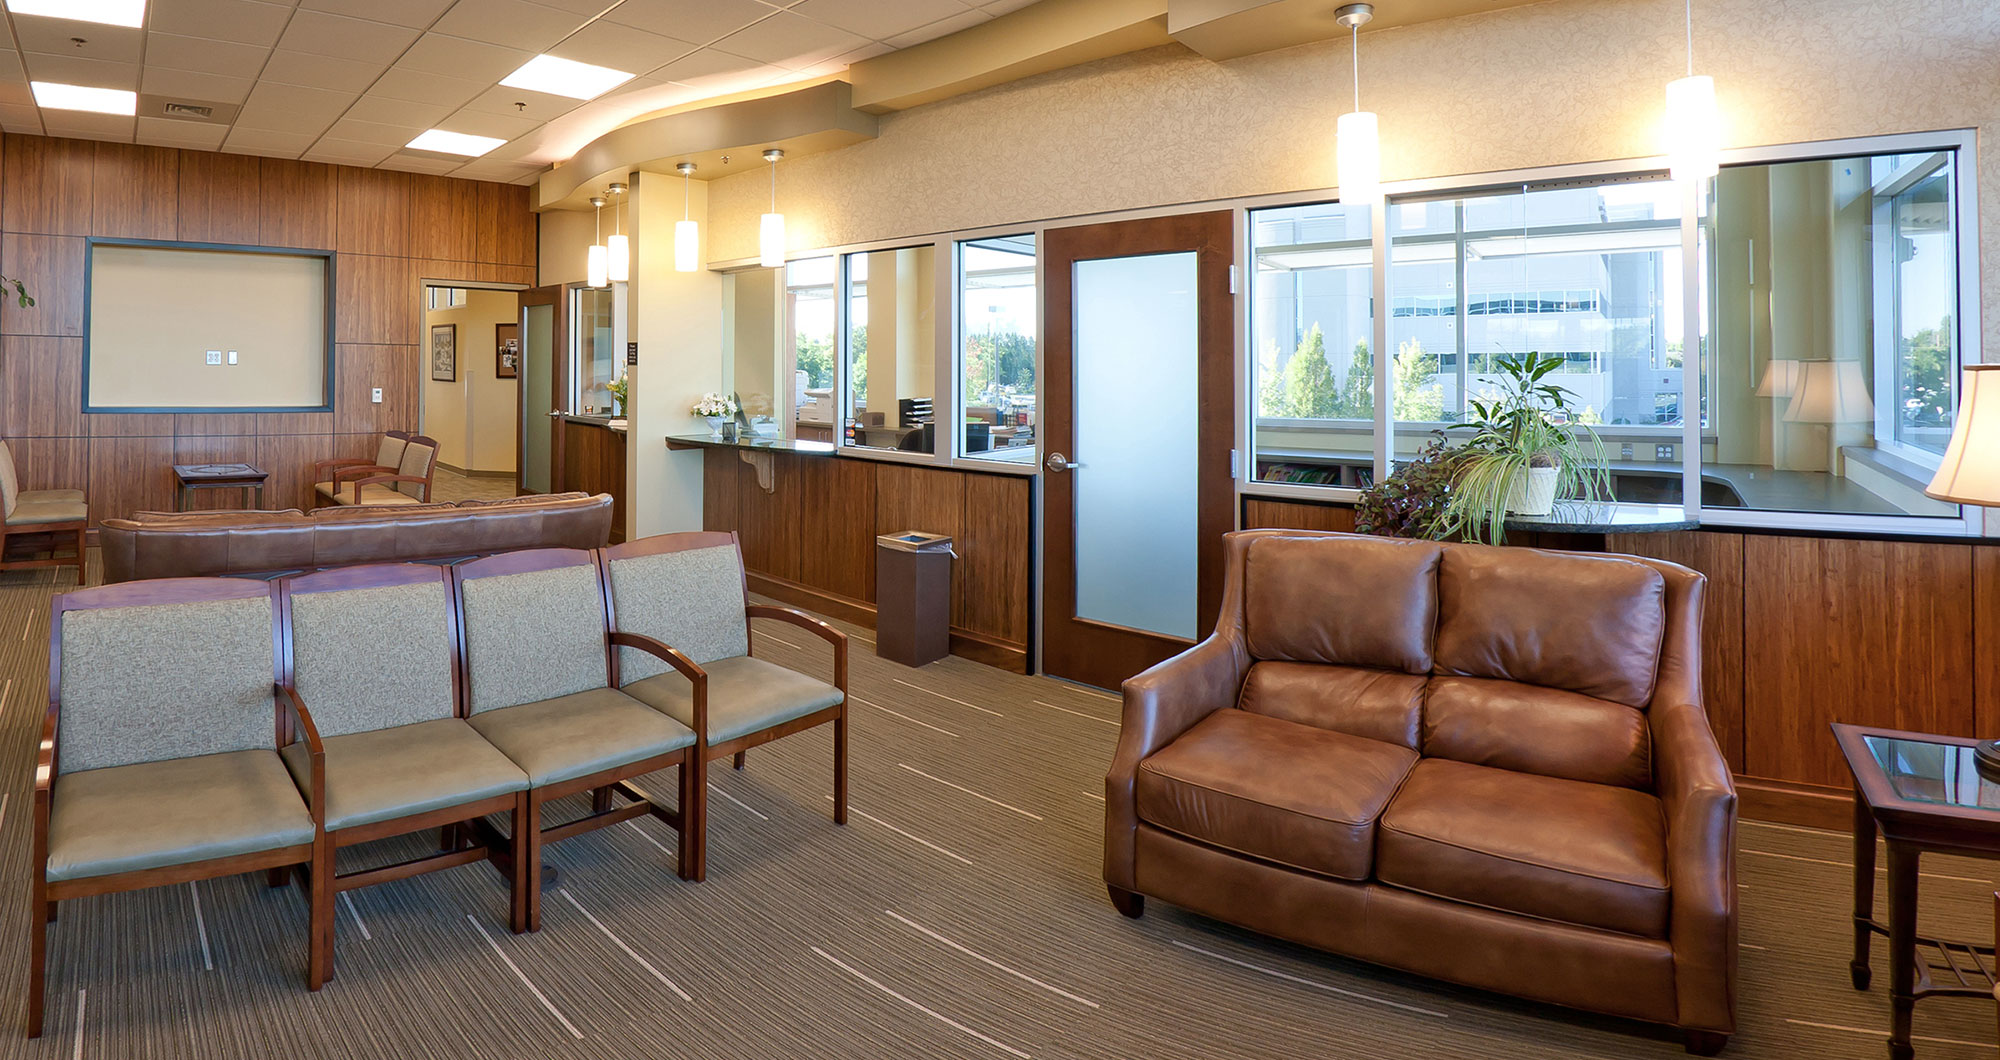 Mulvaney Medical Office Building Waiting Room